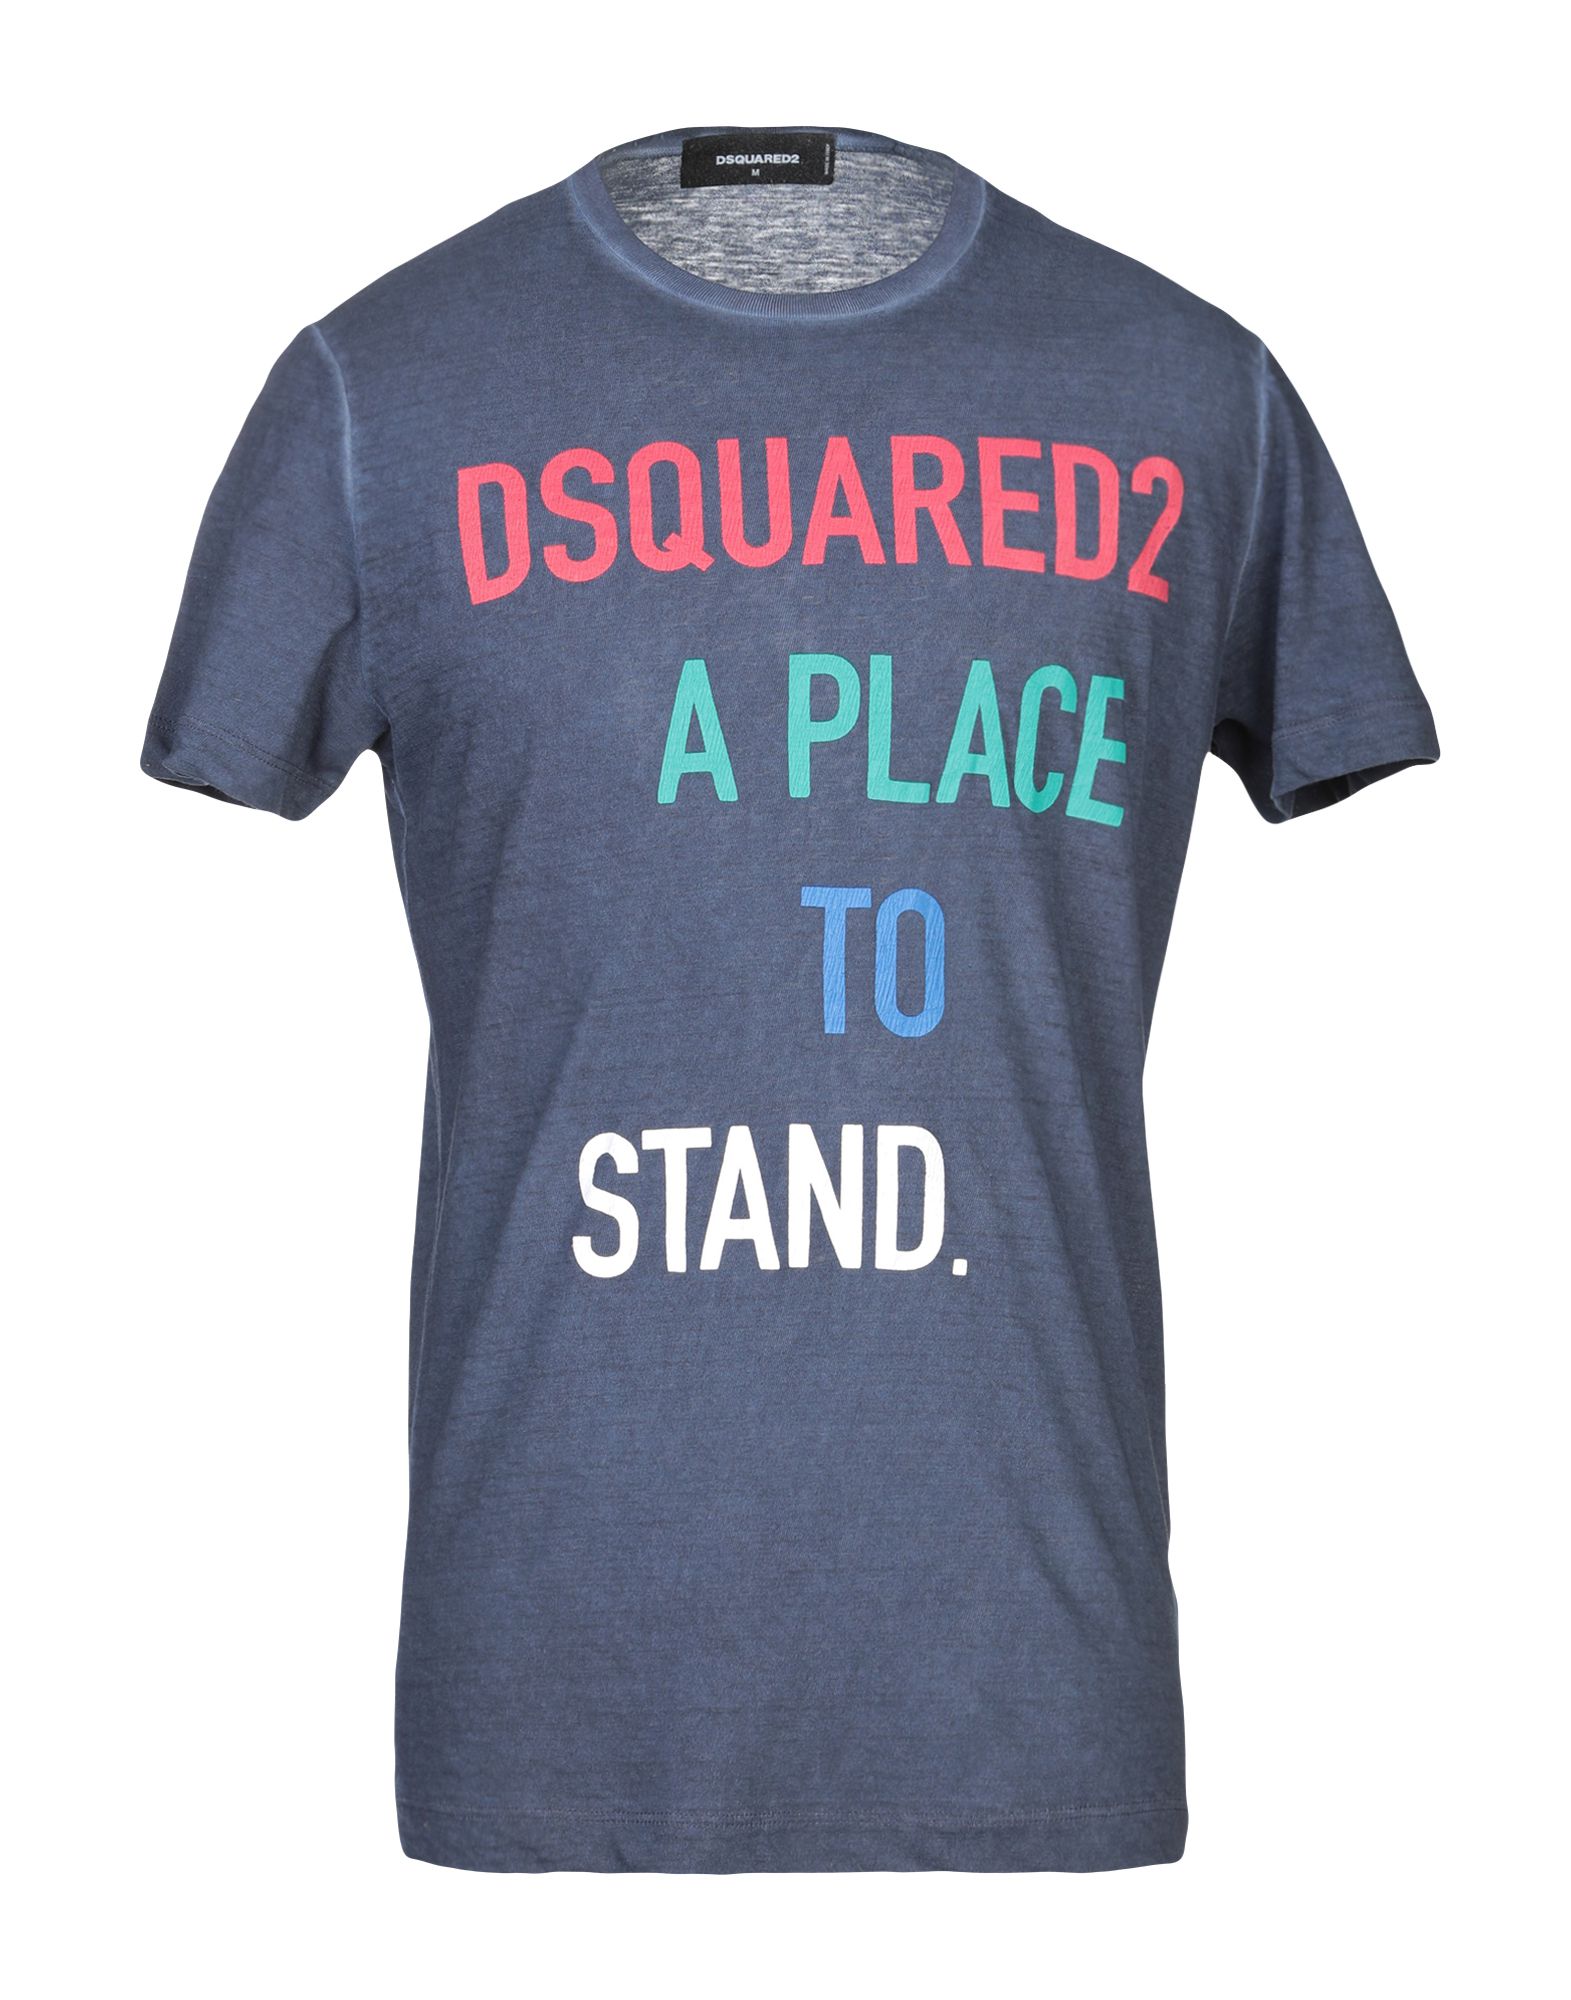 dsquared2 a place to stand